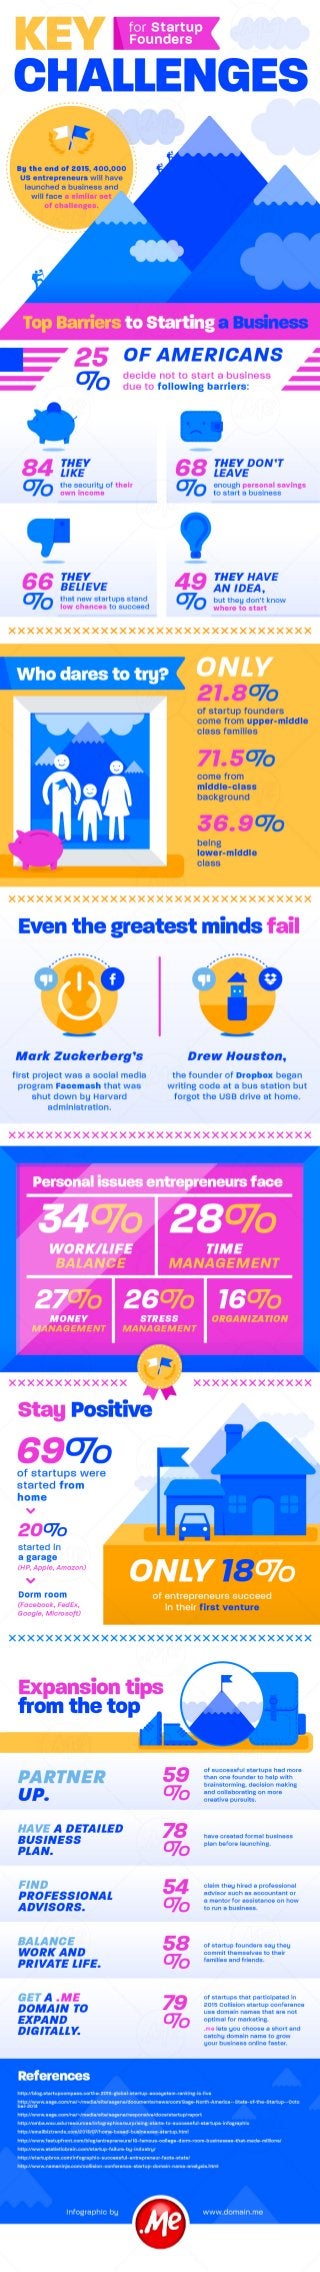 [INFOGRAPHIC] Key Challenges for Startup Founders